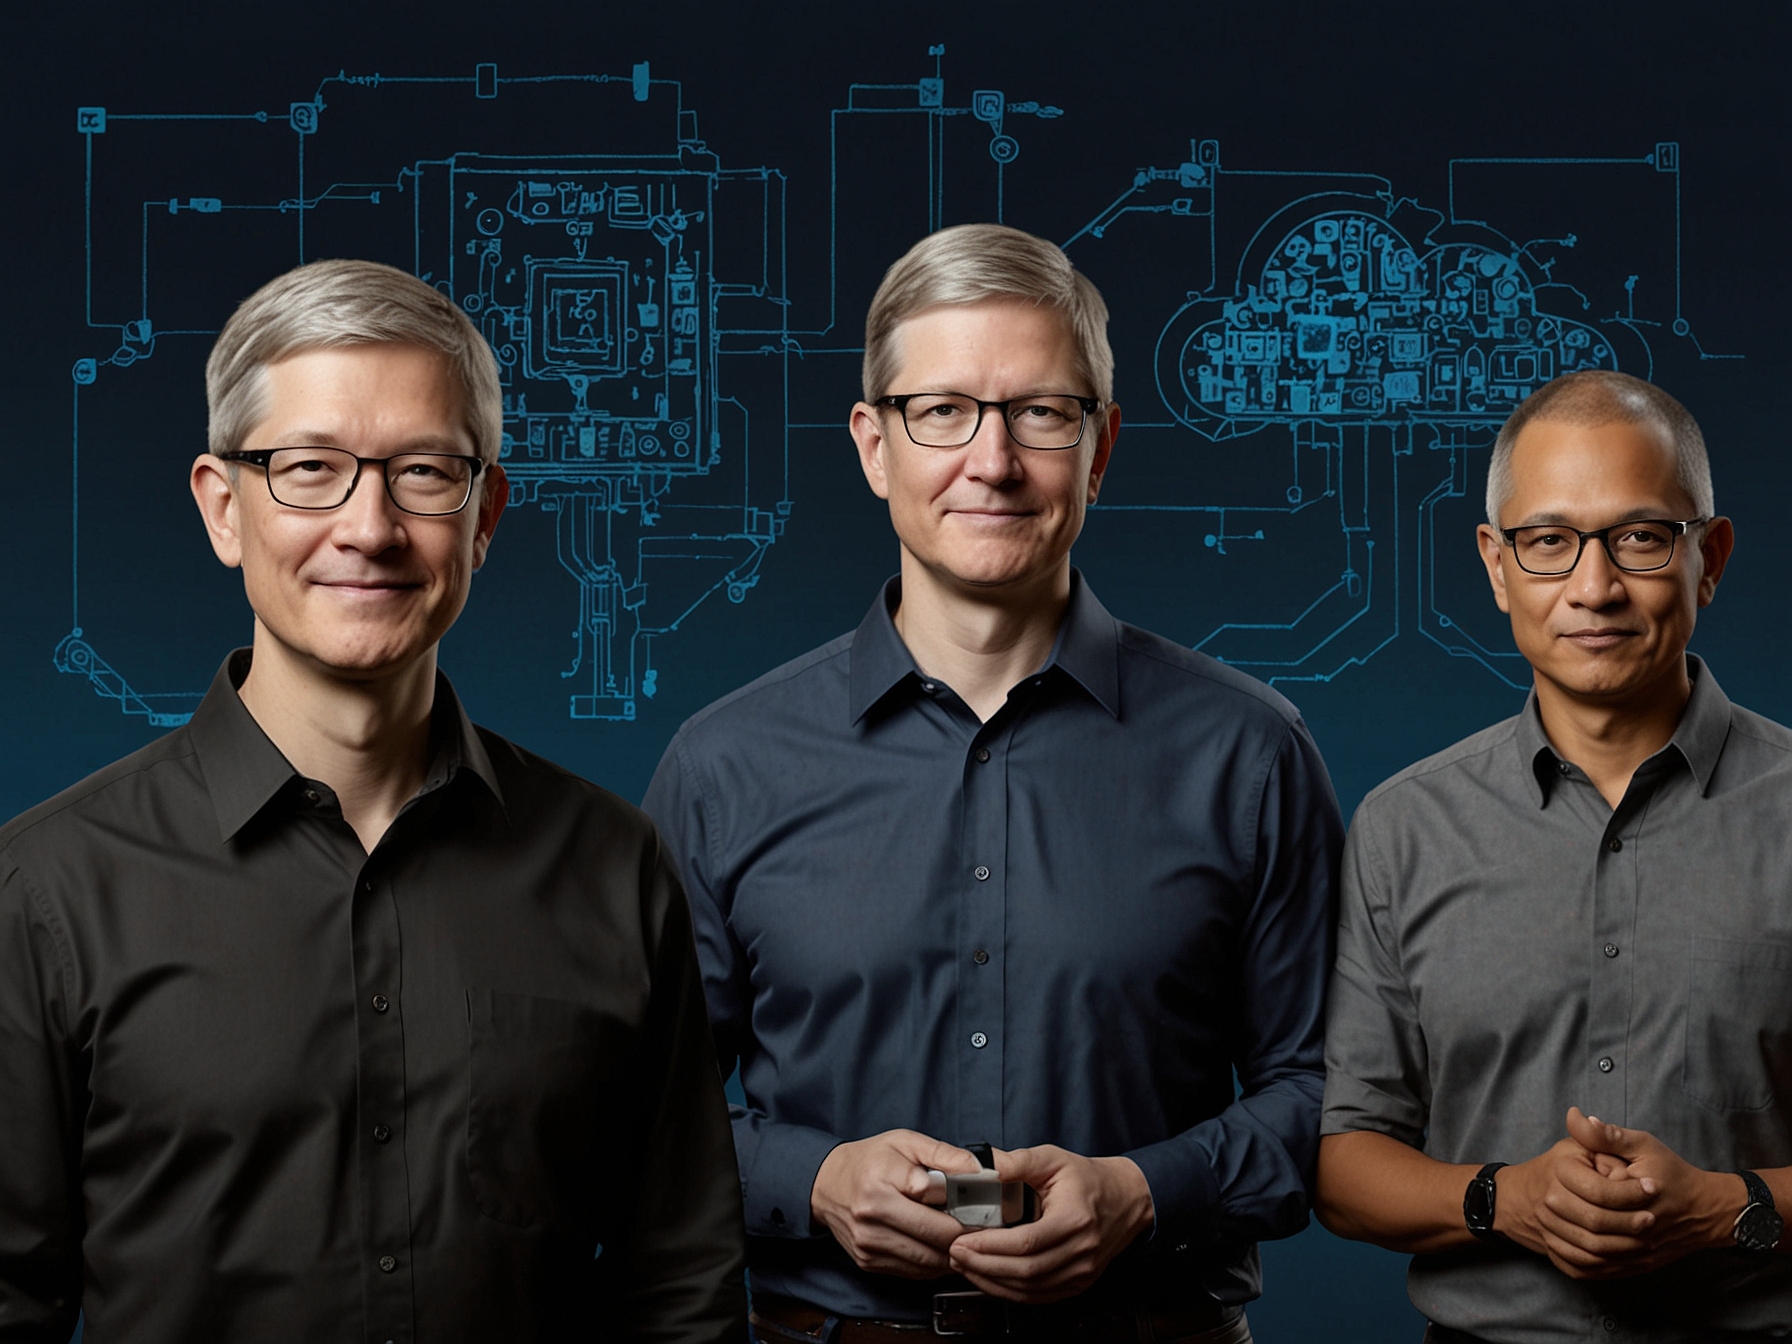 An illustration depicting Jensen Huang, Tim Cook, and Satya Nadella with symbolic elements of AI, cloud computing, and consumer devices to represent their leadership in tech innovation.